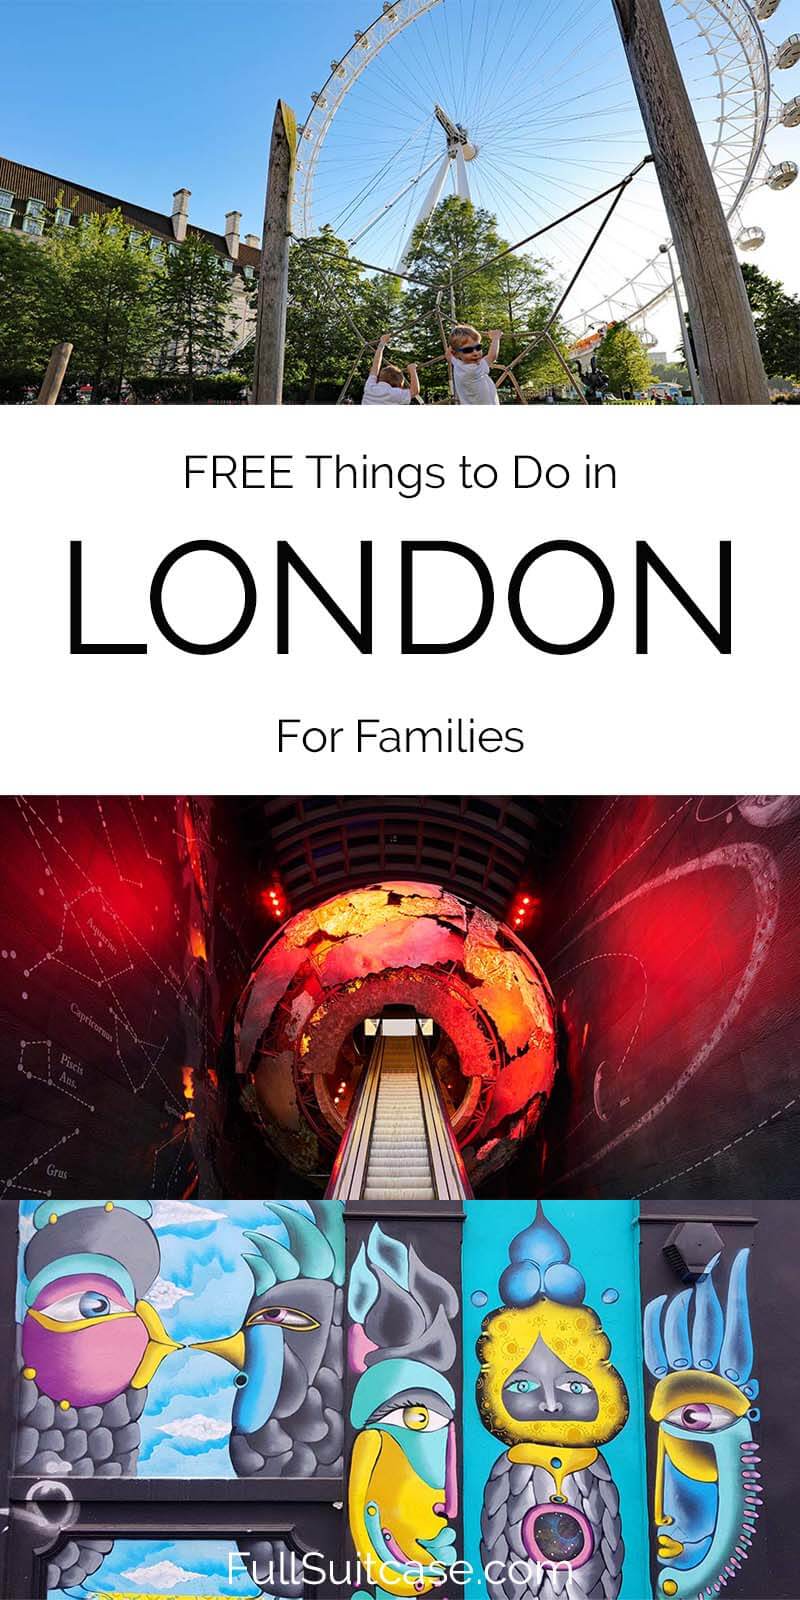 Free sights and things to do in London for families with kids